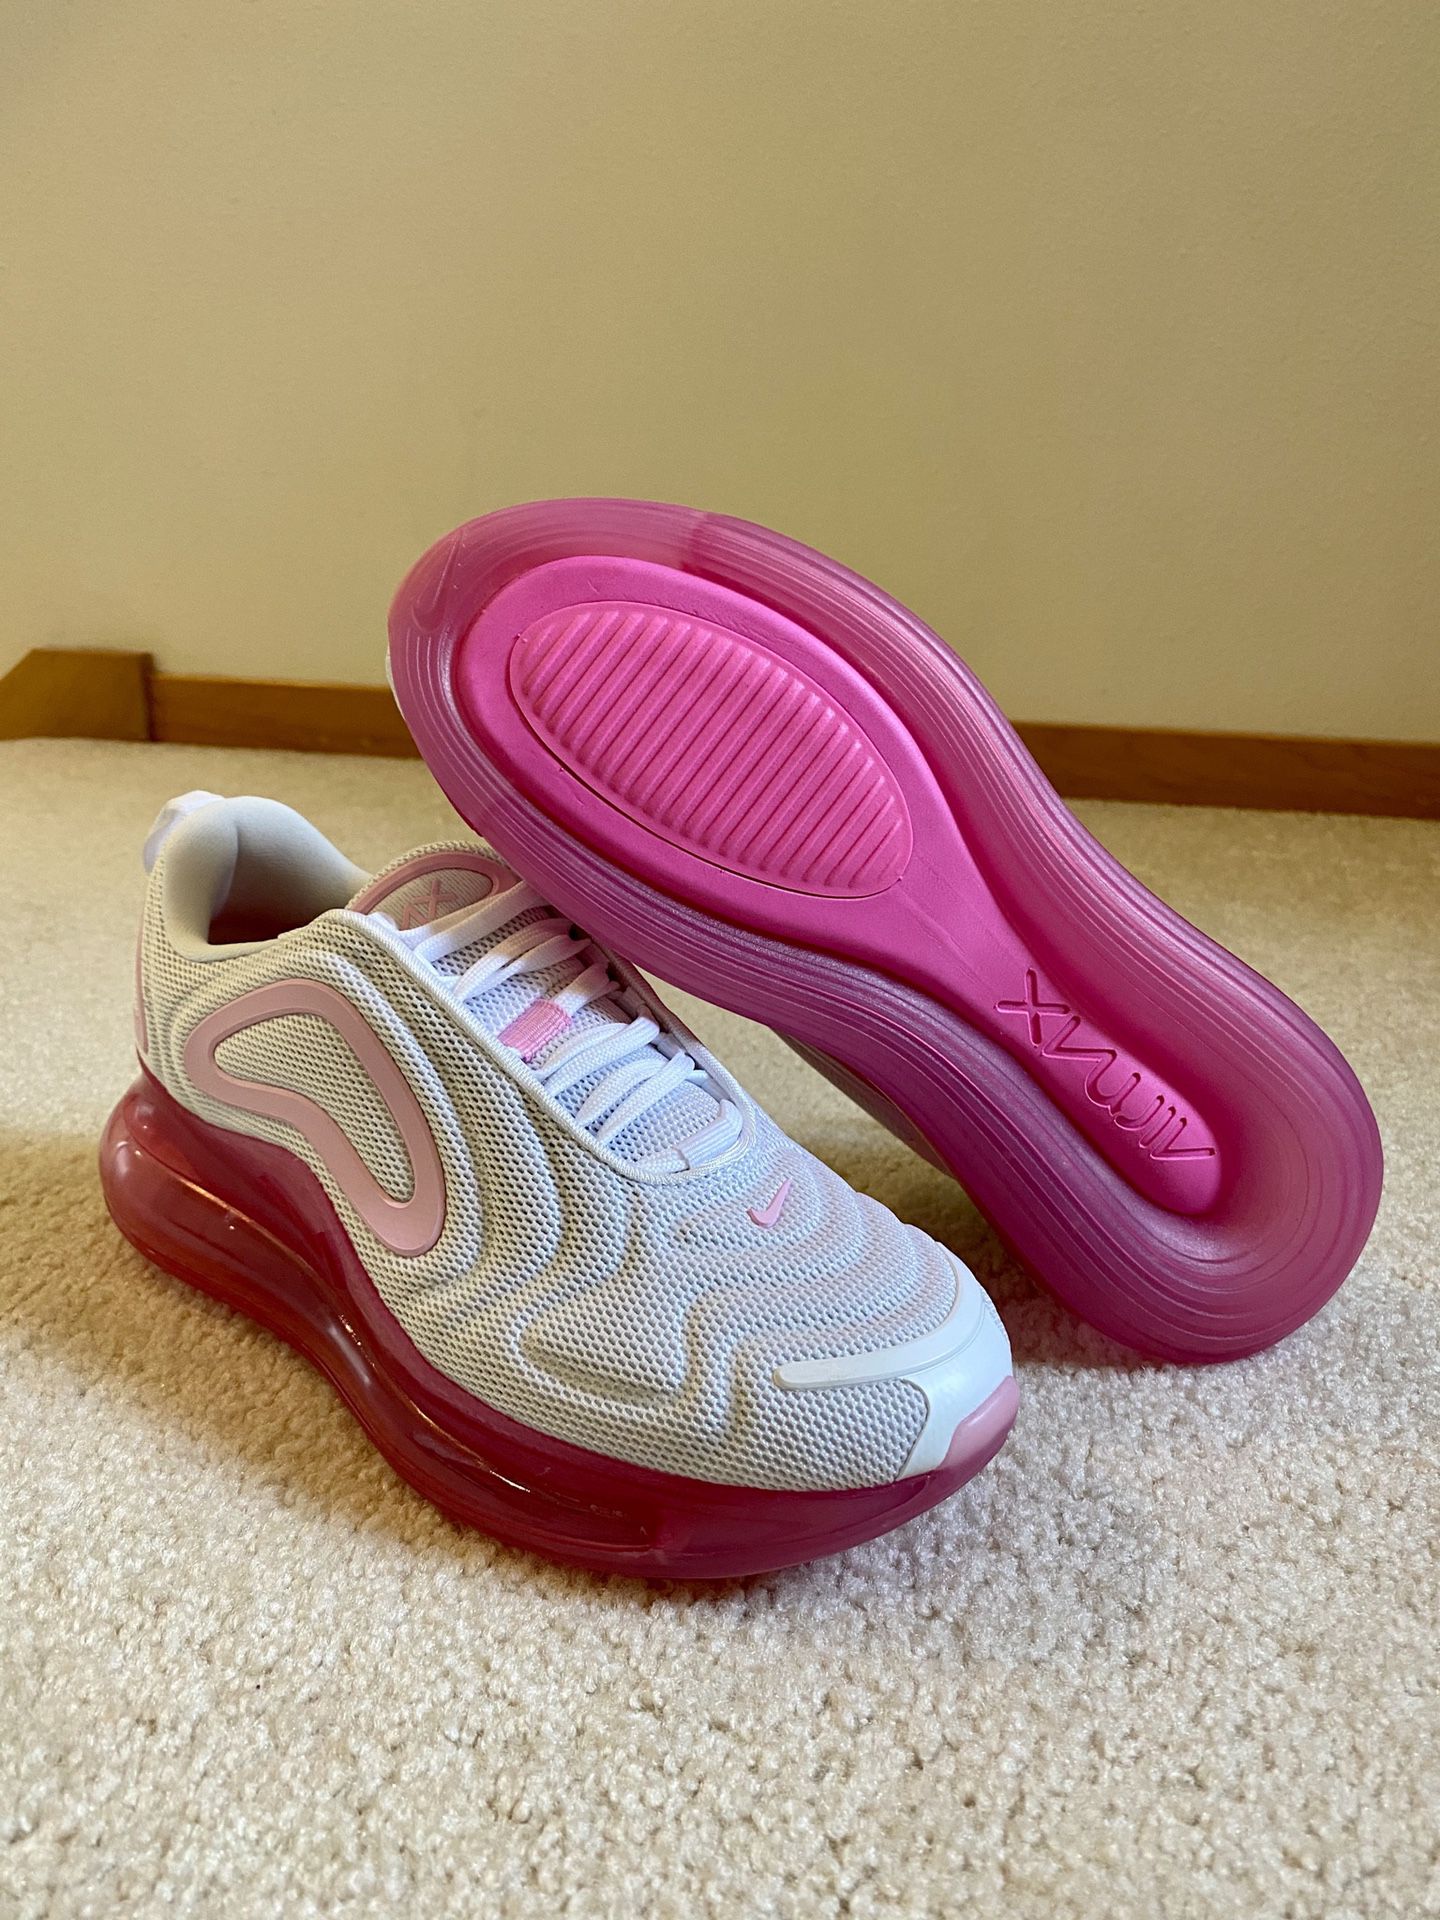 Nike Air Max 720 “Pink Rise” AR9293-103 Womens Size 8 New Running Shoe